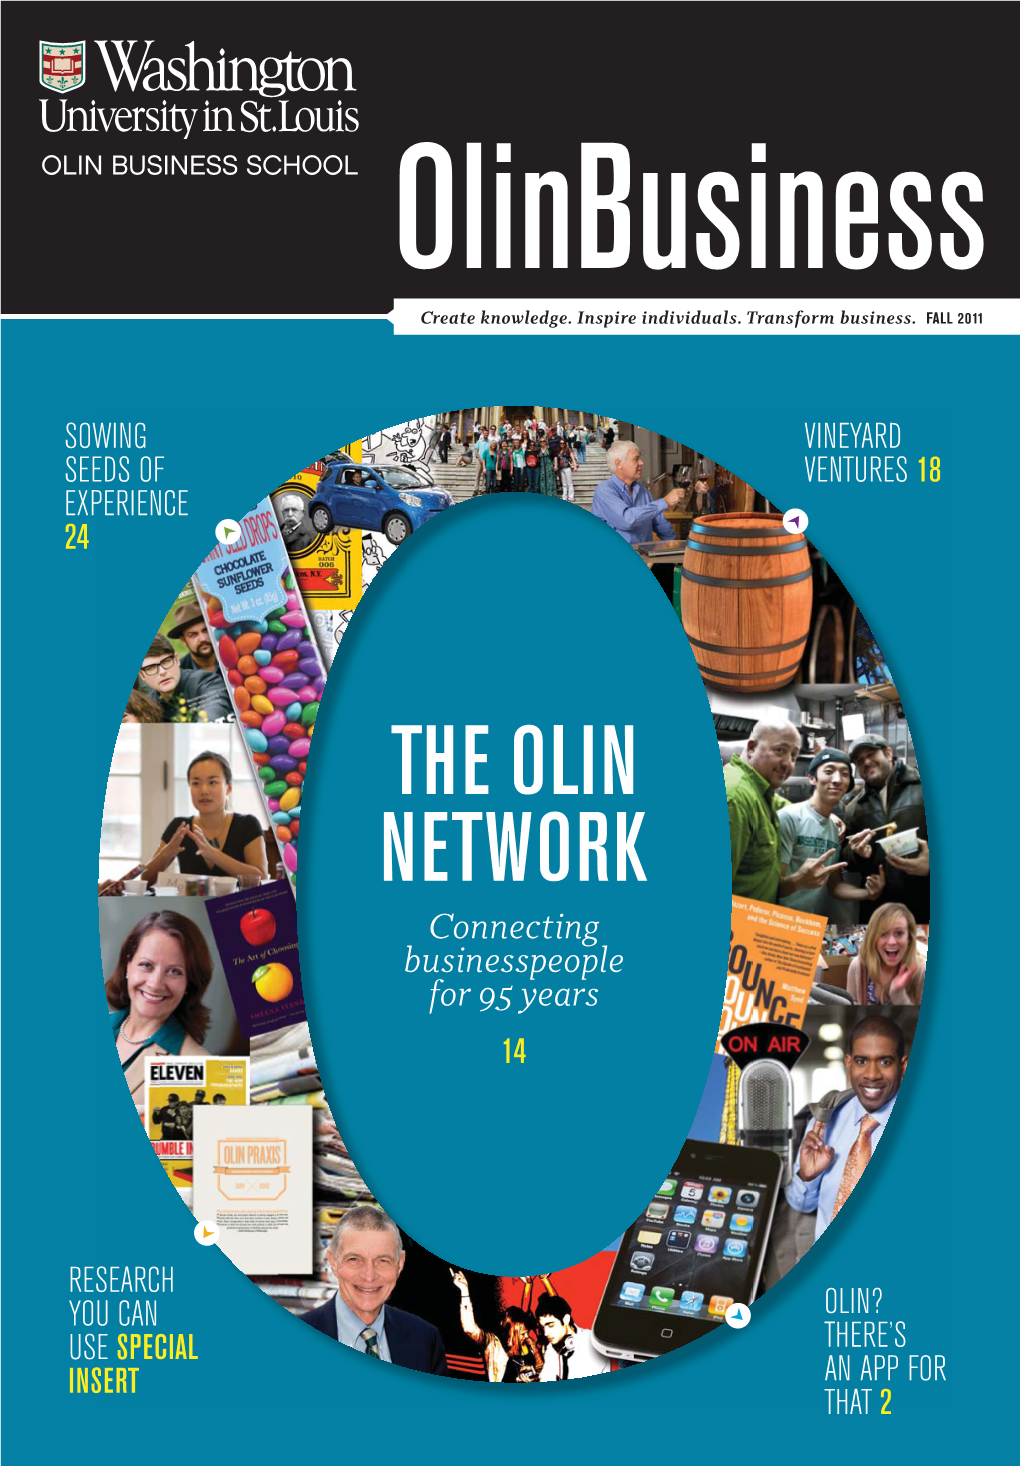 THE OLIN NETWORK Connecting Businesspeople for 95 Years 14